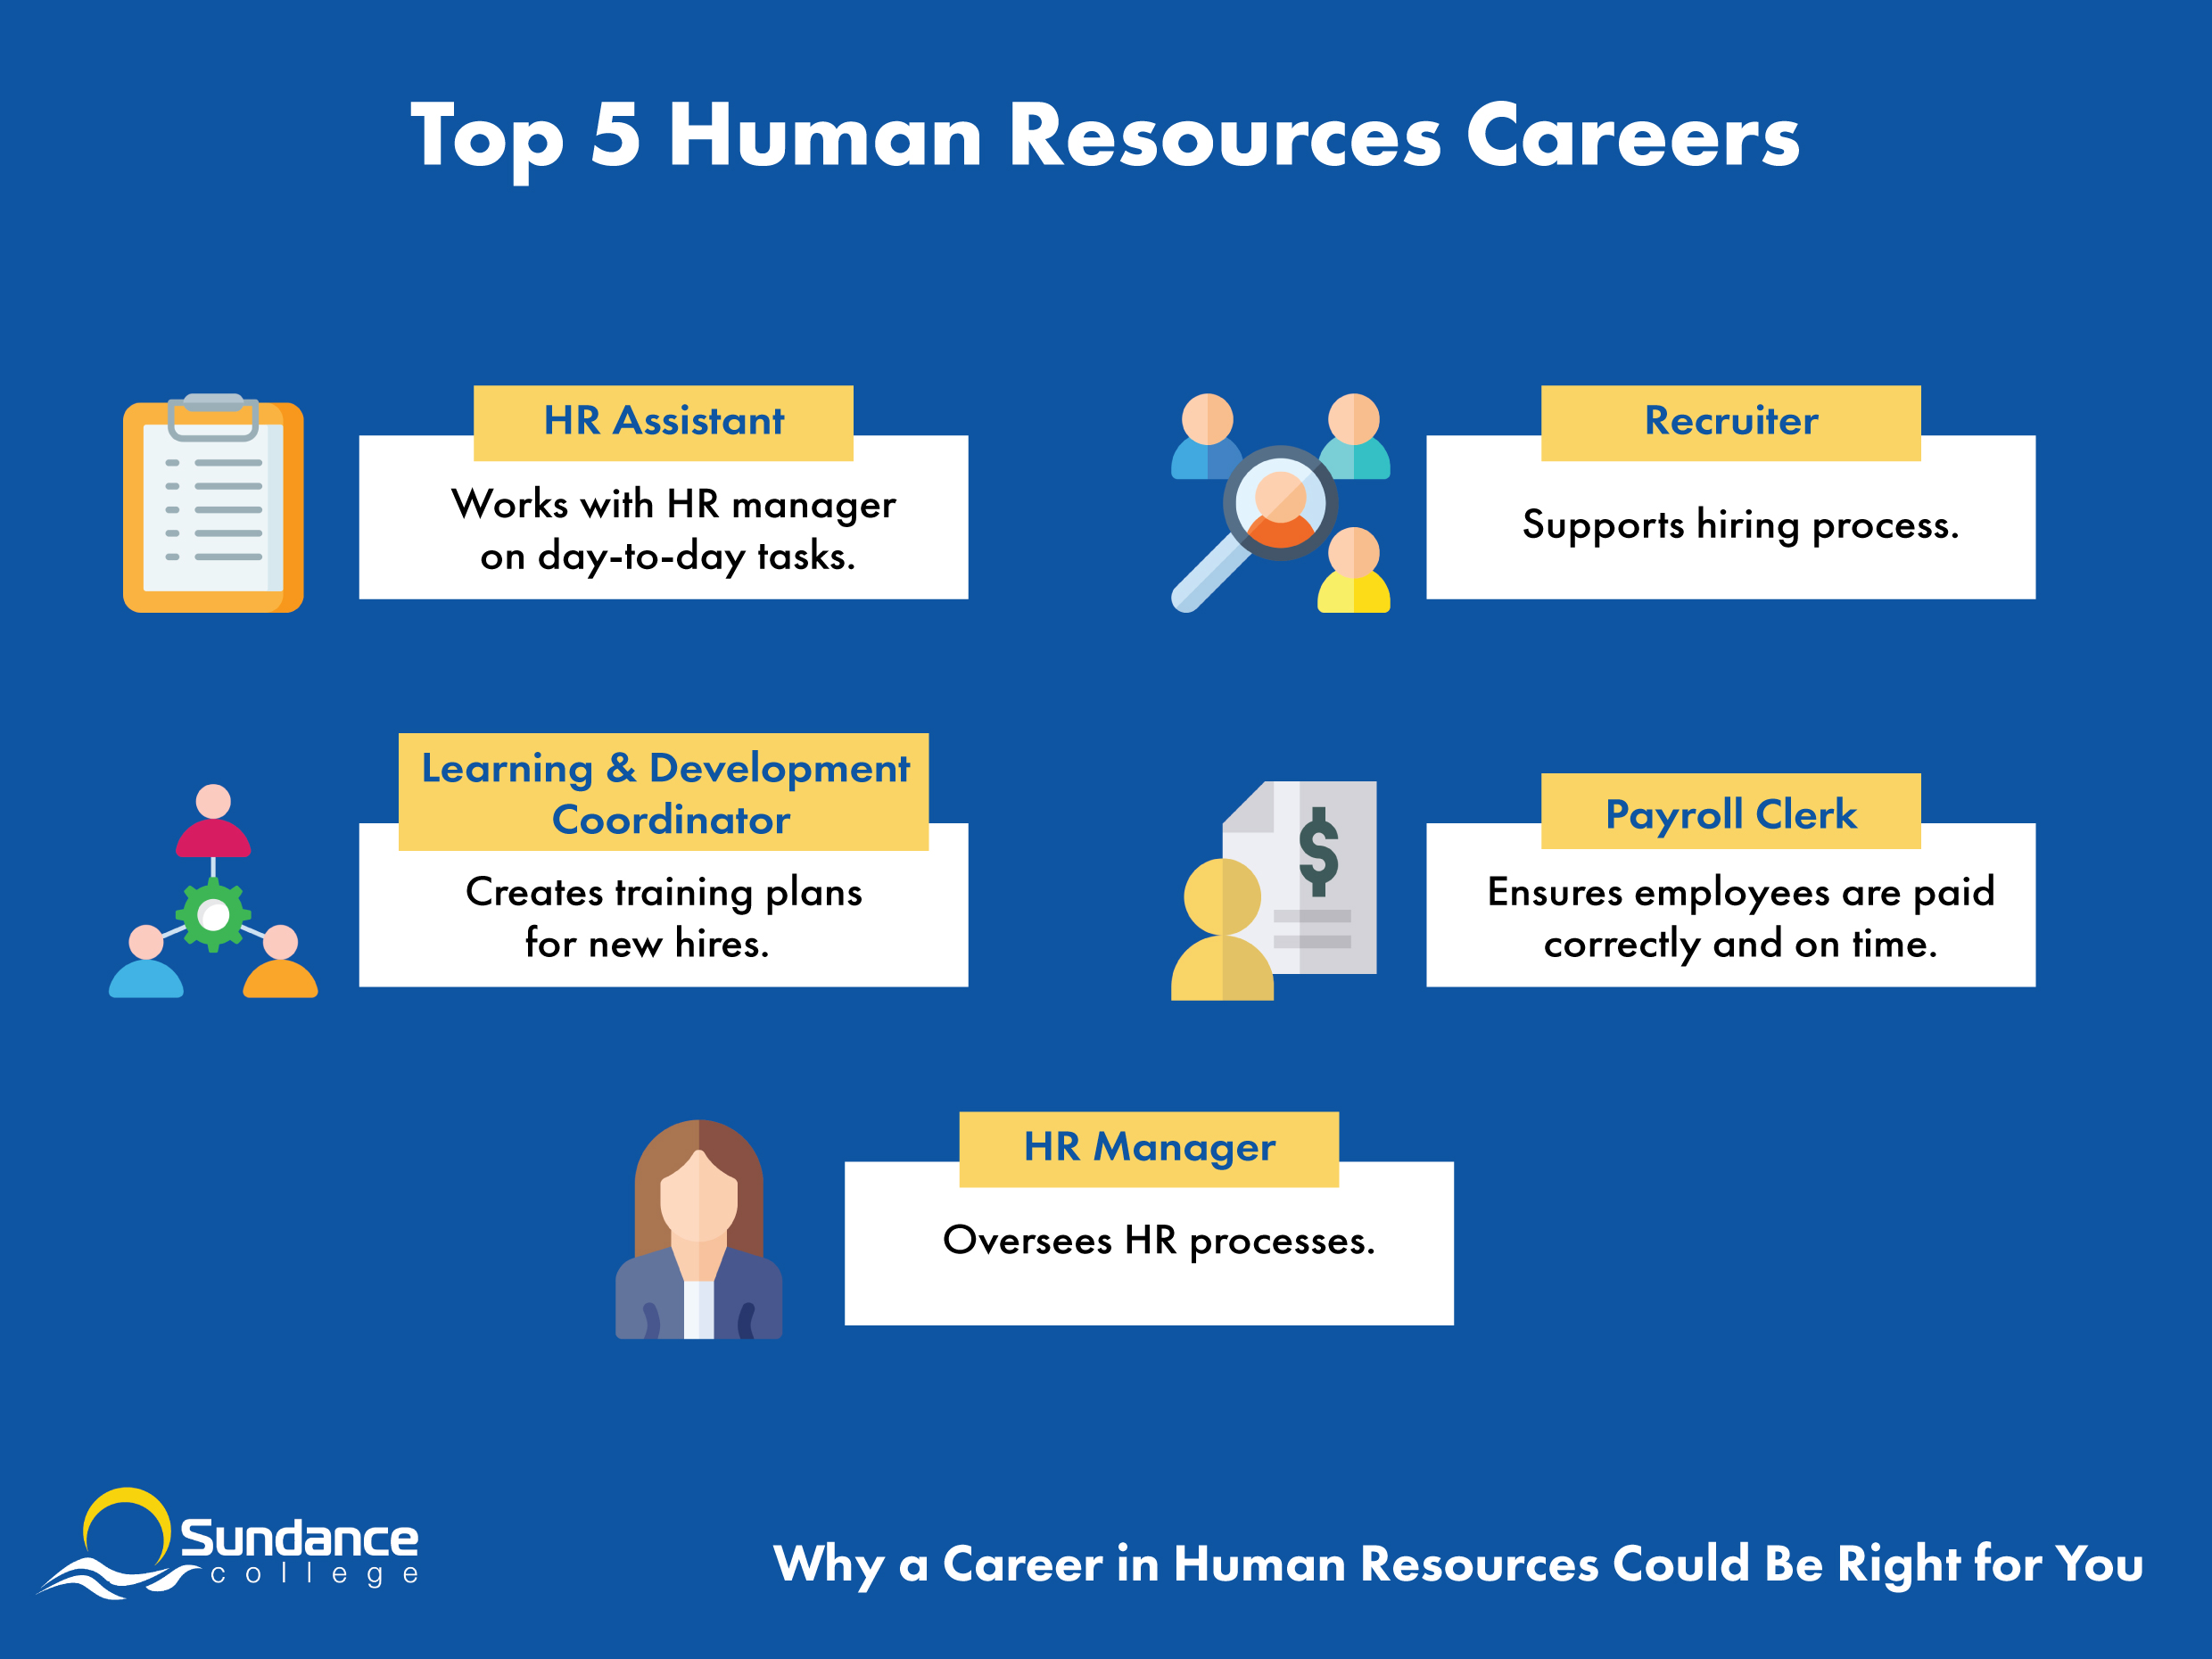 Infographic displaying top 5 human resources careers: HR assistant, recruiter, learning and development coordinator, payroll clerk, HR manager.